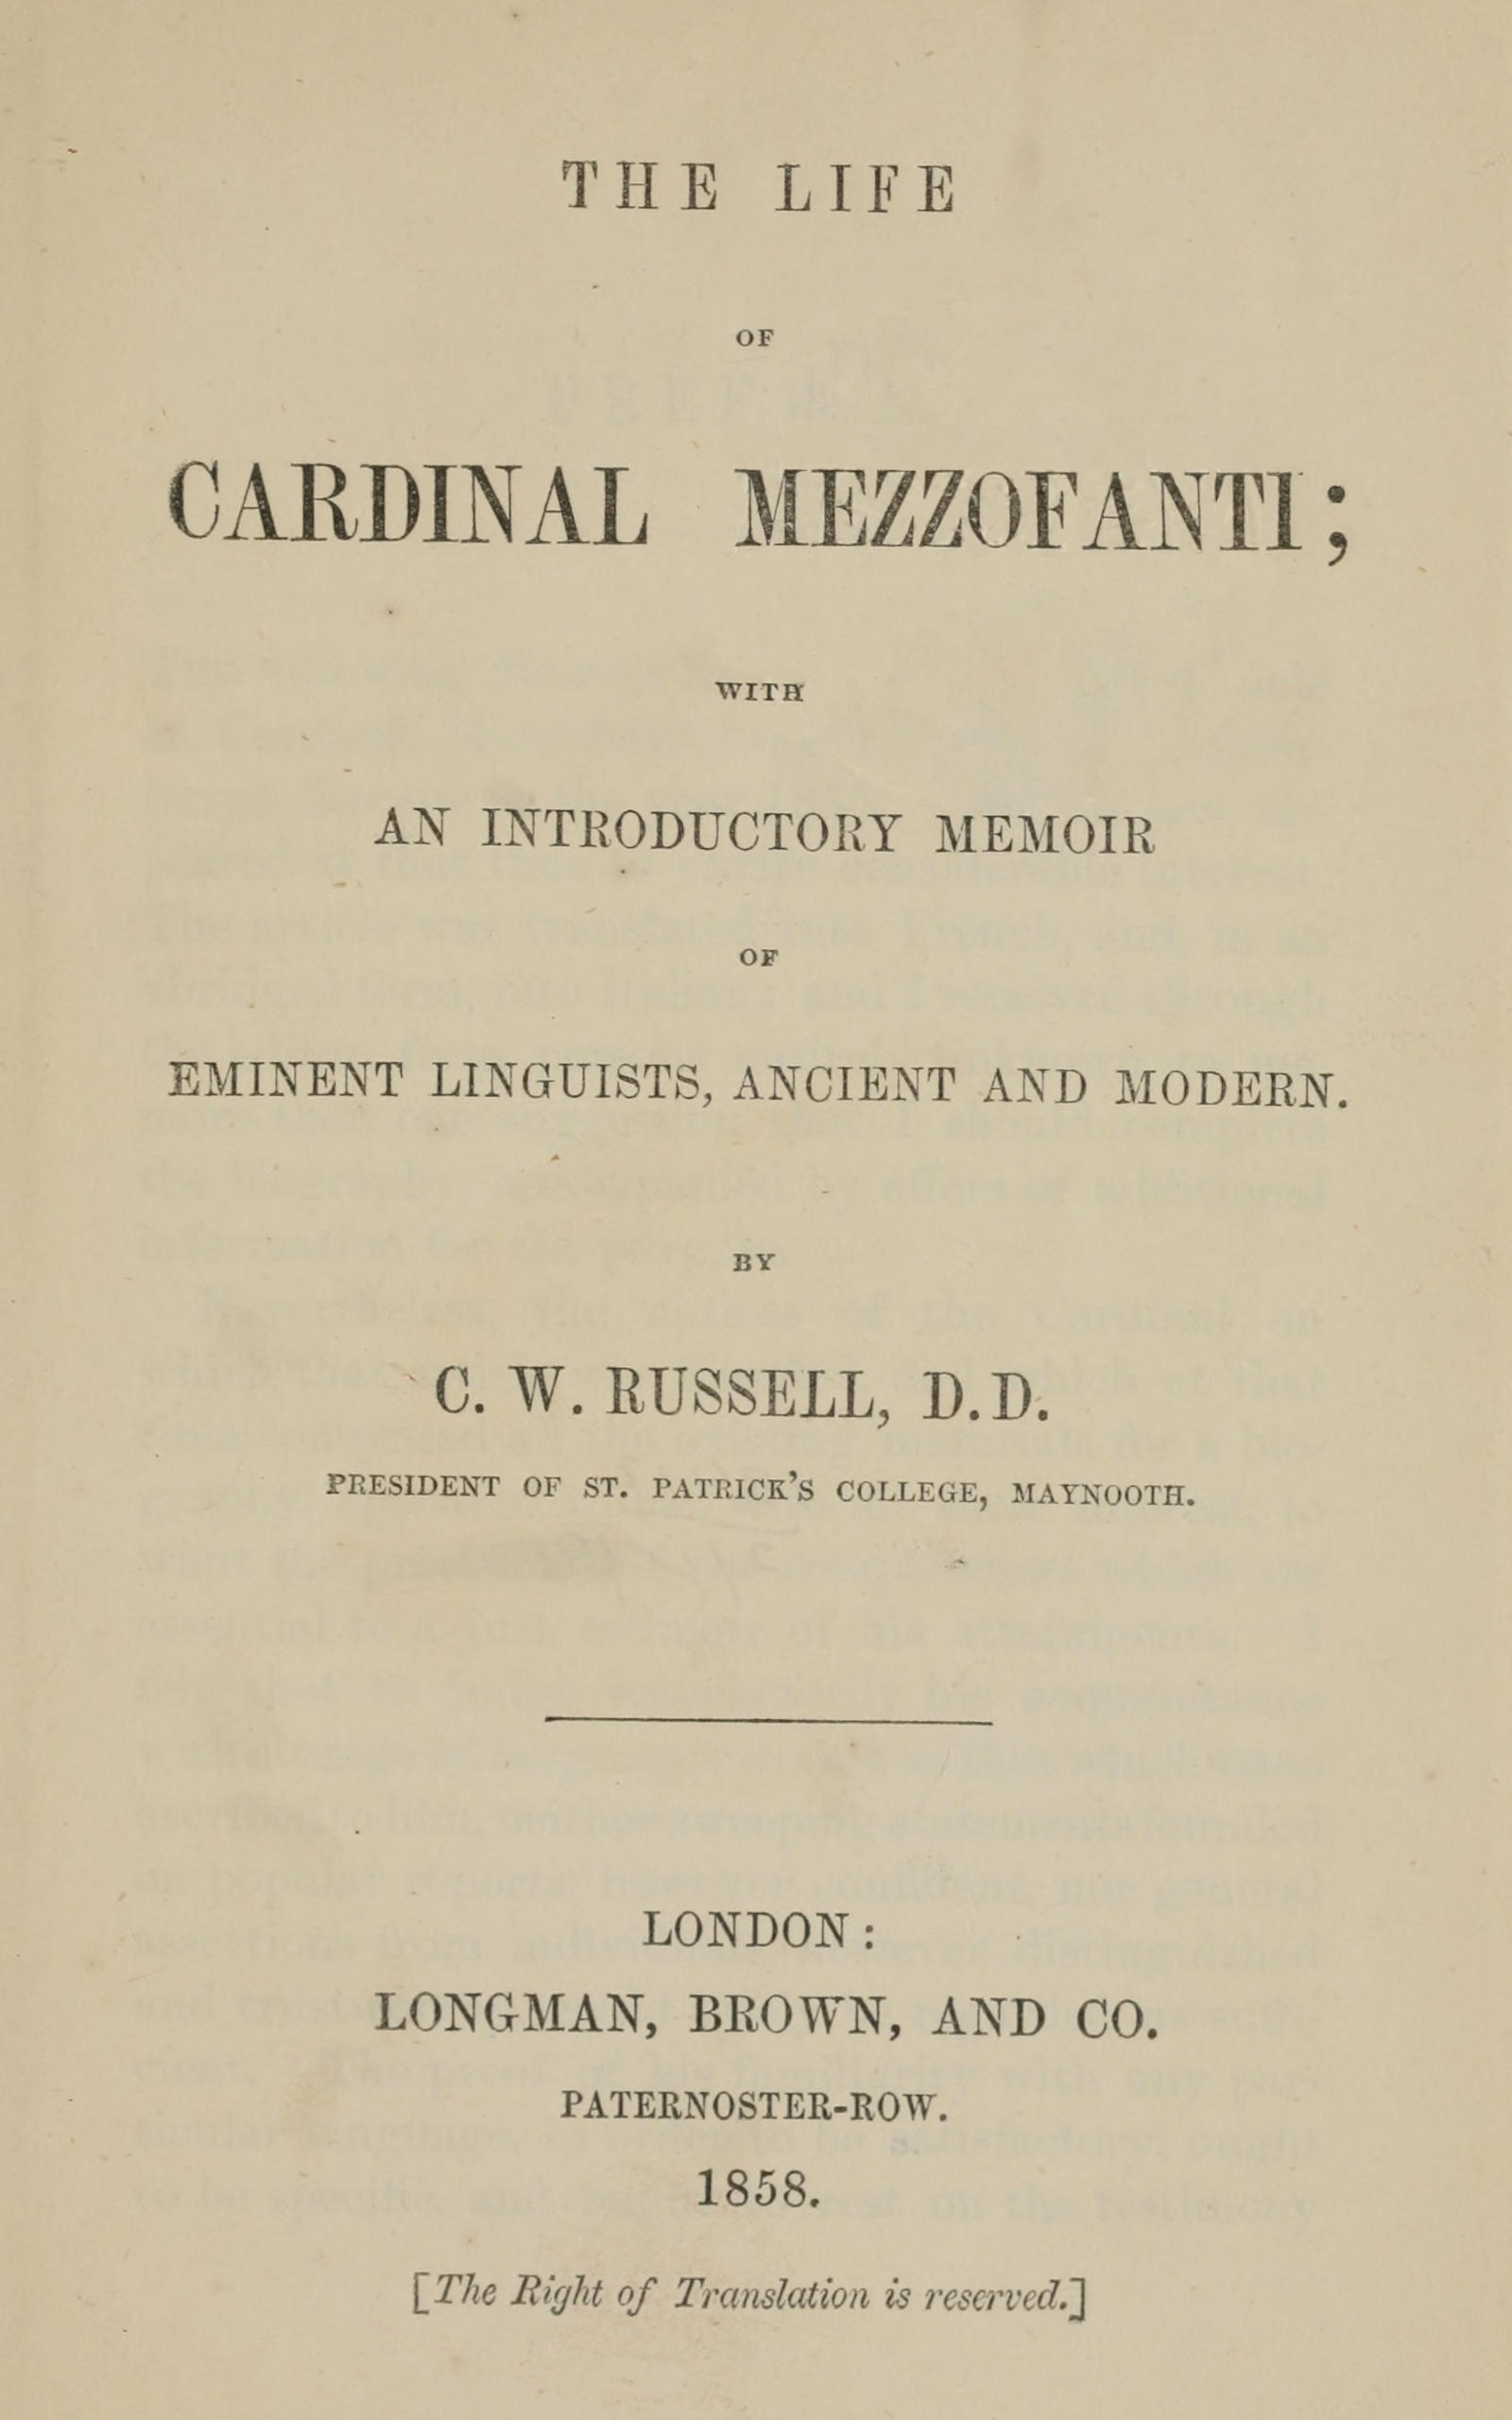 The life of Cardinal Mezzofanti&#10;With an introductory memoir of eminent linguists, ancient and modern